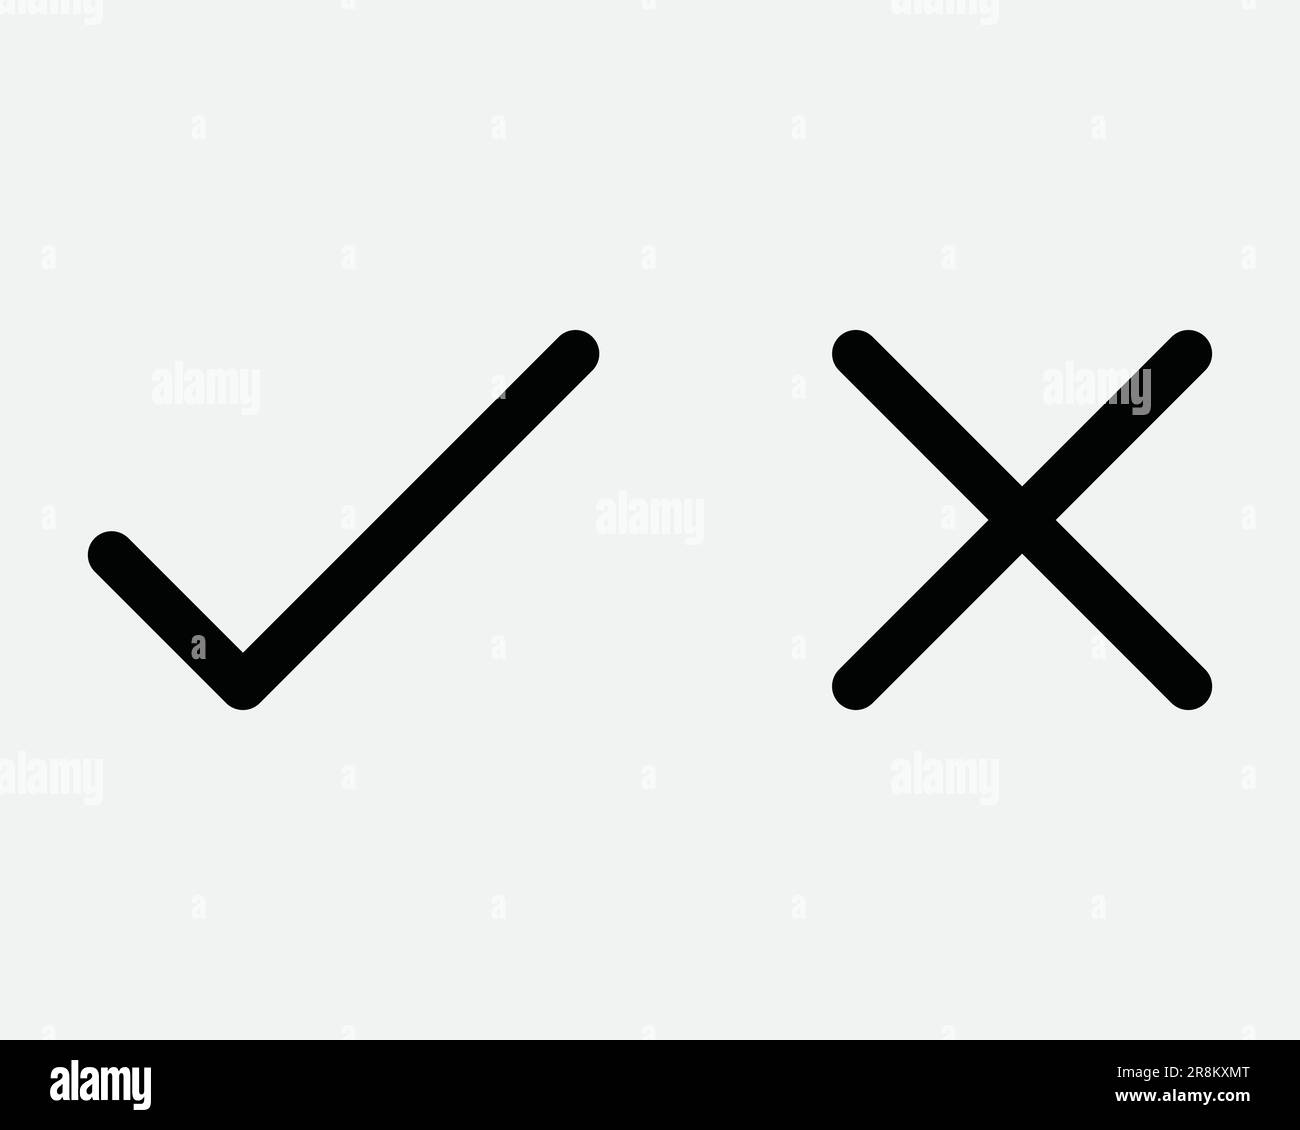 Right and Wrong Icon. Tick Cross Correct Incorrect Okay OK Status Positive Negative True False. Black White Sign Symbol Graphic Clipart EPS Vector Stock Vector